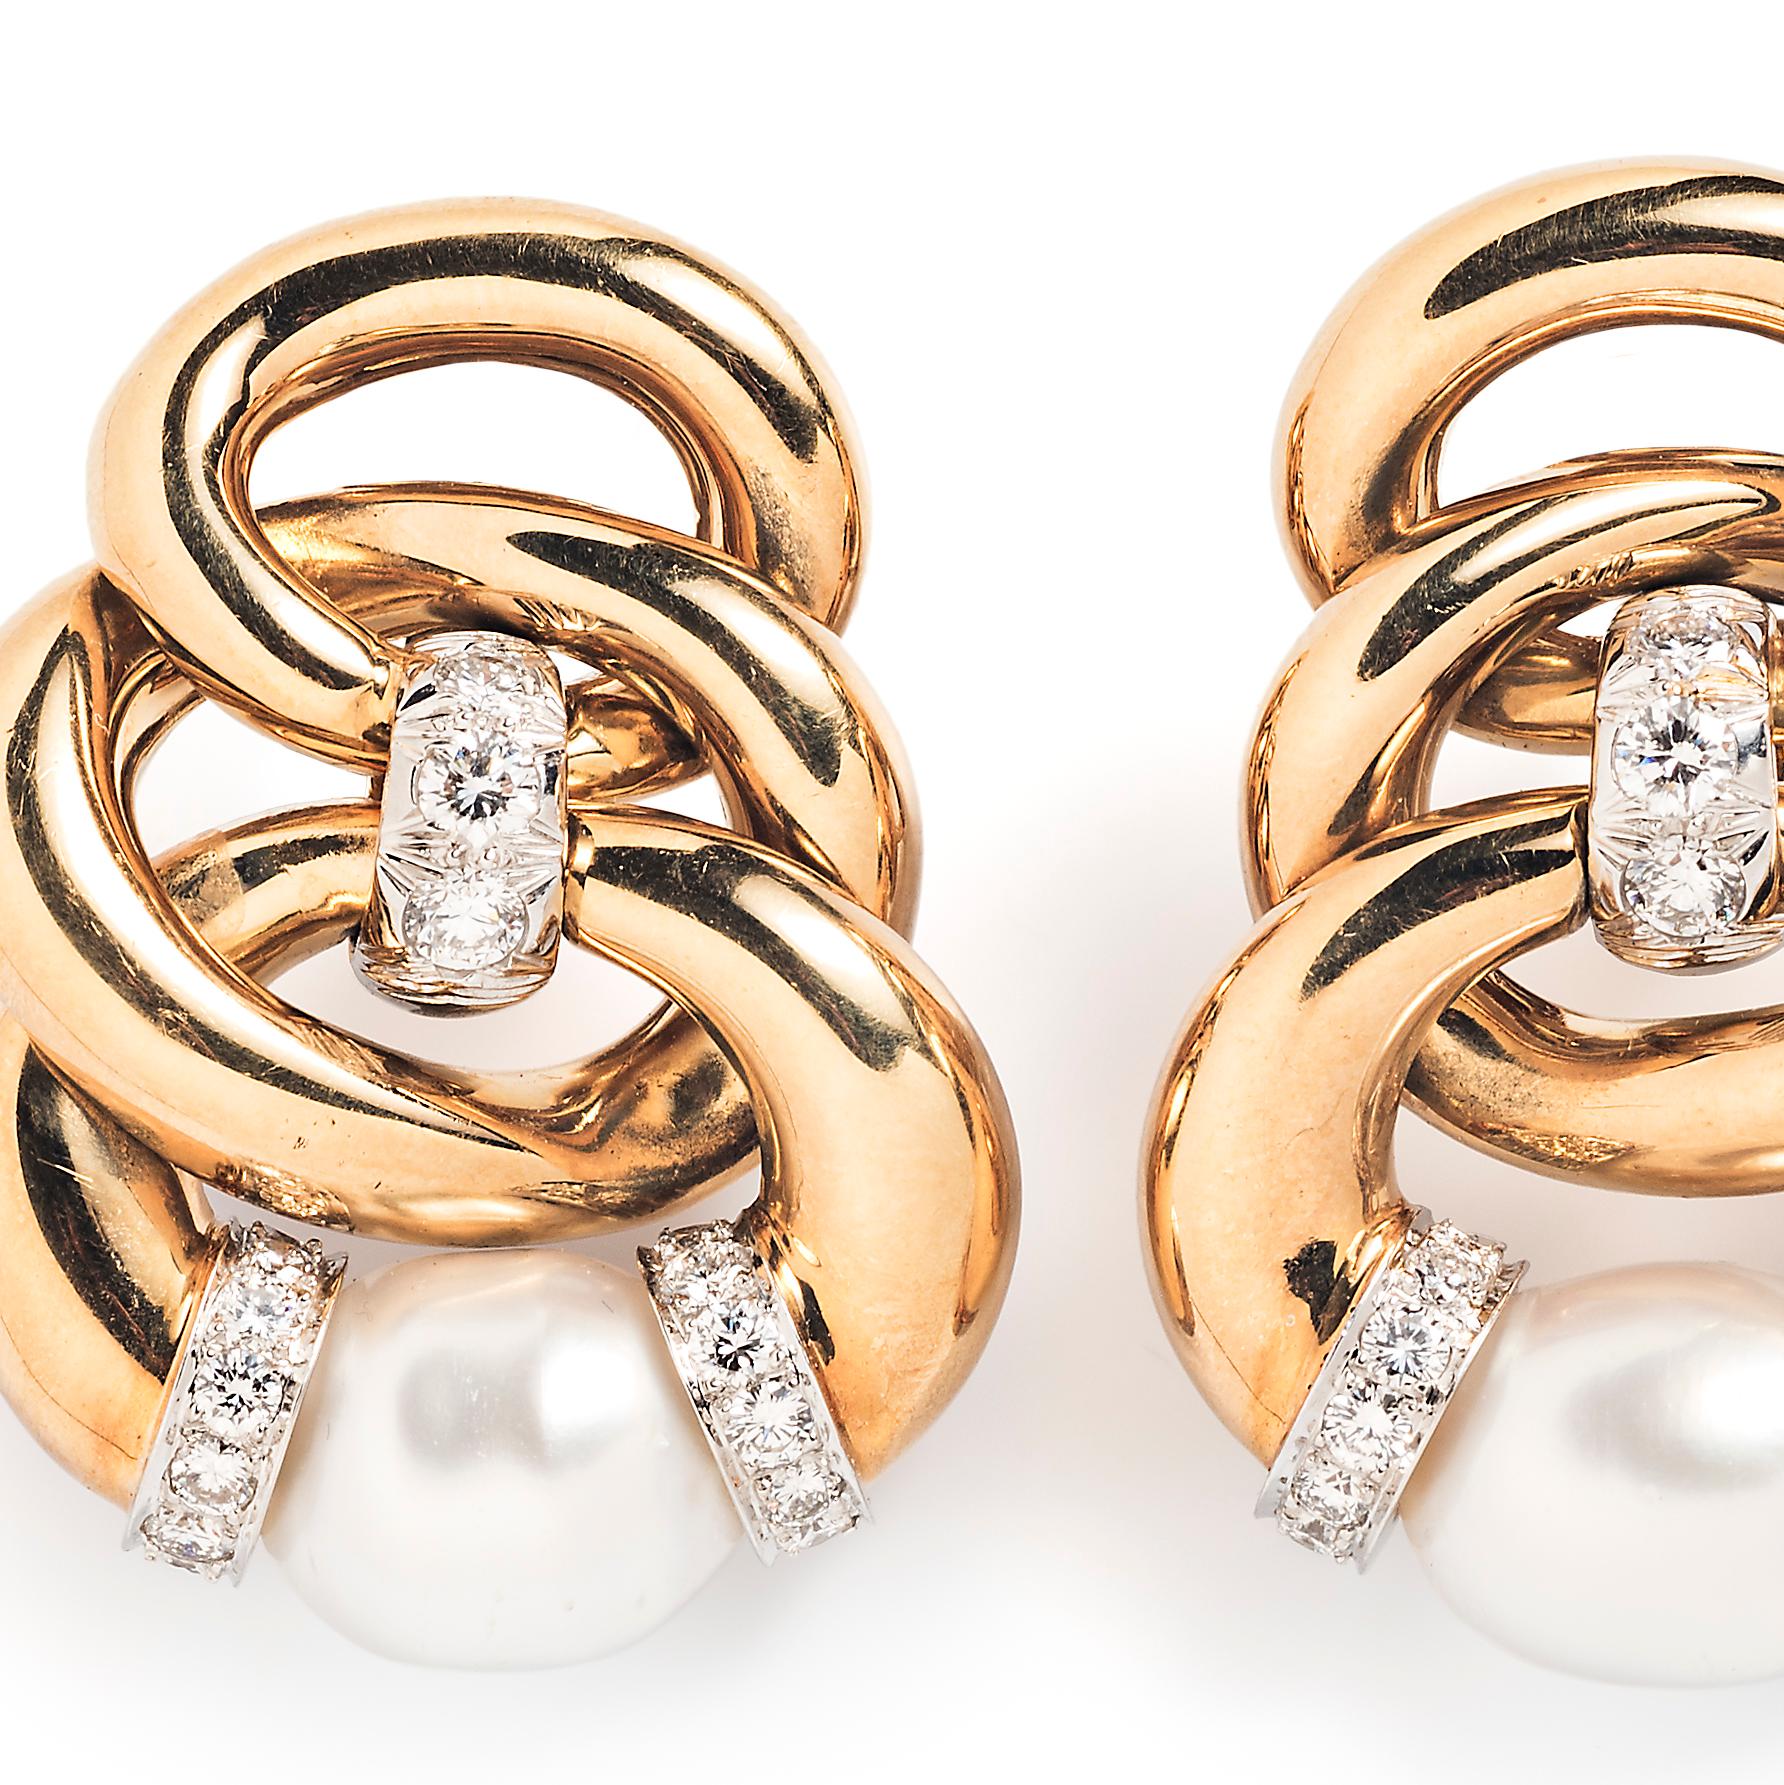 David Webb’s sense of modernity and polish is on full display in these opulent ear clips from the 1960s. Three 18k yellow gold interlocking links are embellished with baroque pearls and diamond accents. 

1.60” long by 1.13” wide 
Approximately 1.50